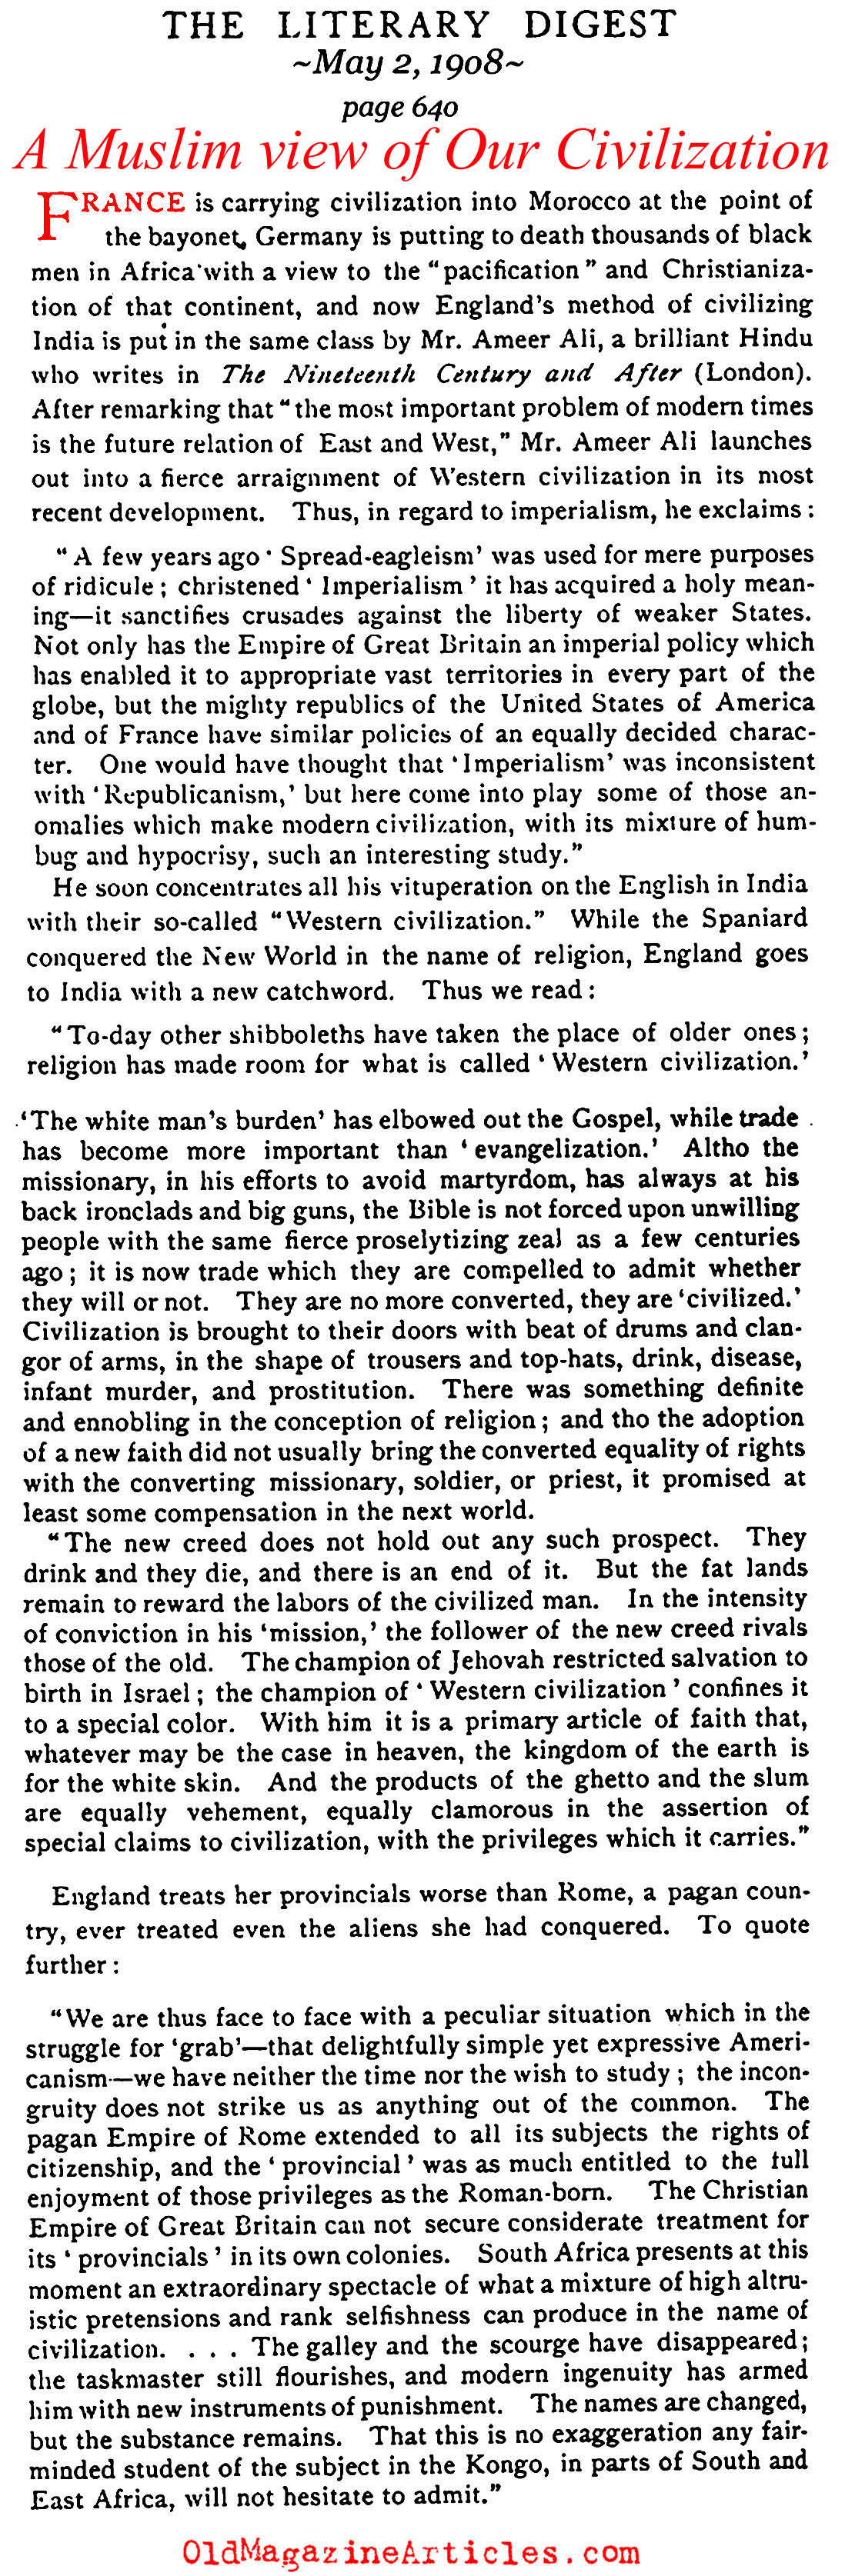 An Islamic View of Western Imperialism (Literary Digest, 1908)